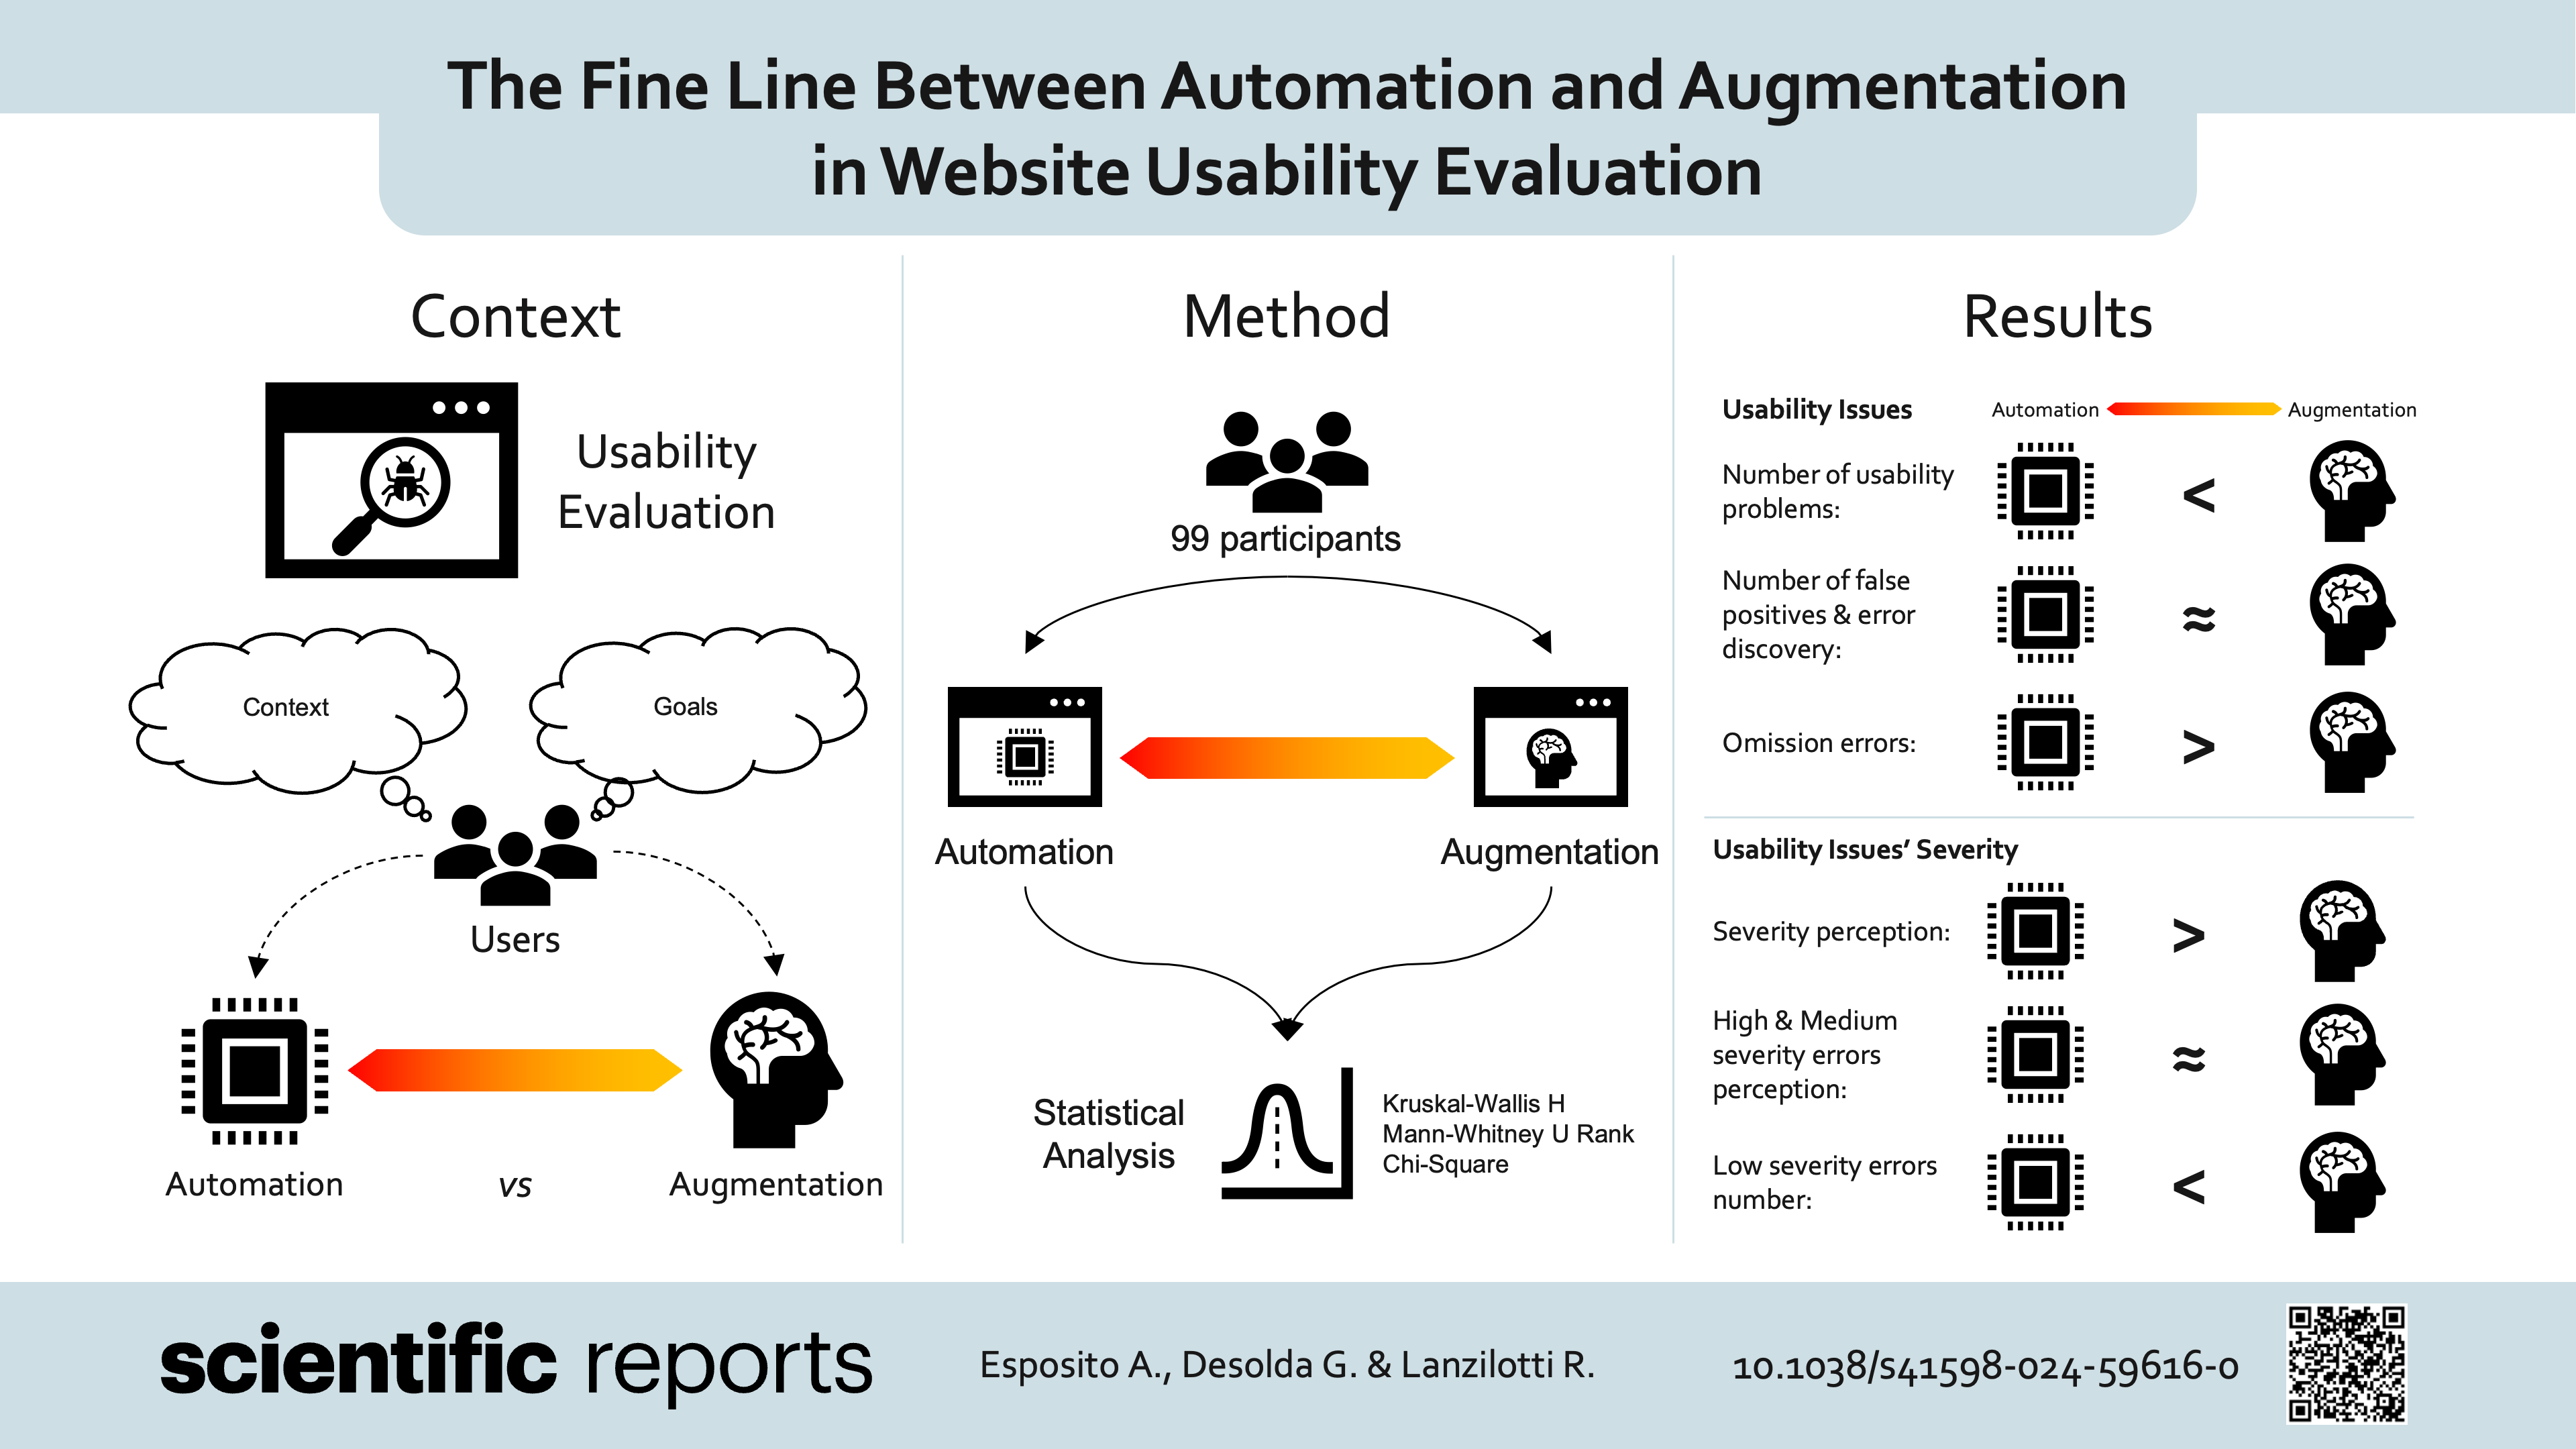 A visual abstract for the manuscript titled “The fine line between automation and augmentation in website usability evaluation.” It feature the title of the paper on top, while the journal logo, authors, and DOI are at the bottom. The main section is subdivided in three columns, titled (from left to right) “Context”, “Method”, and “Results”. The context is the one of usability evaluations, and shows a set of users that tip the scale of automation vs augmentation through the context of use and their goals. The methods show a set of 99 participants, divided into different conditions that allowed to collect data that were then analysed. The results show that automation and augmentation have different benefits and drawbacks, and selection depends on the goal. More granular details on the results are provided in the visual abstract, but cannot be reported in this description due to space reasons.